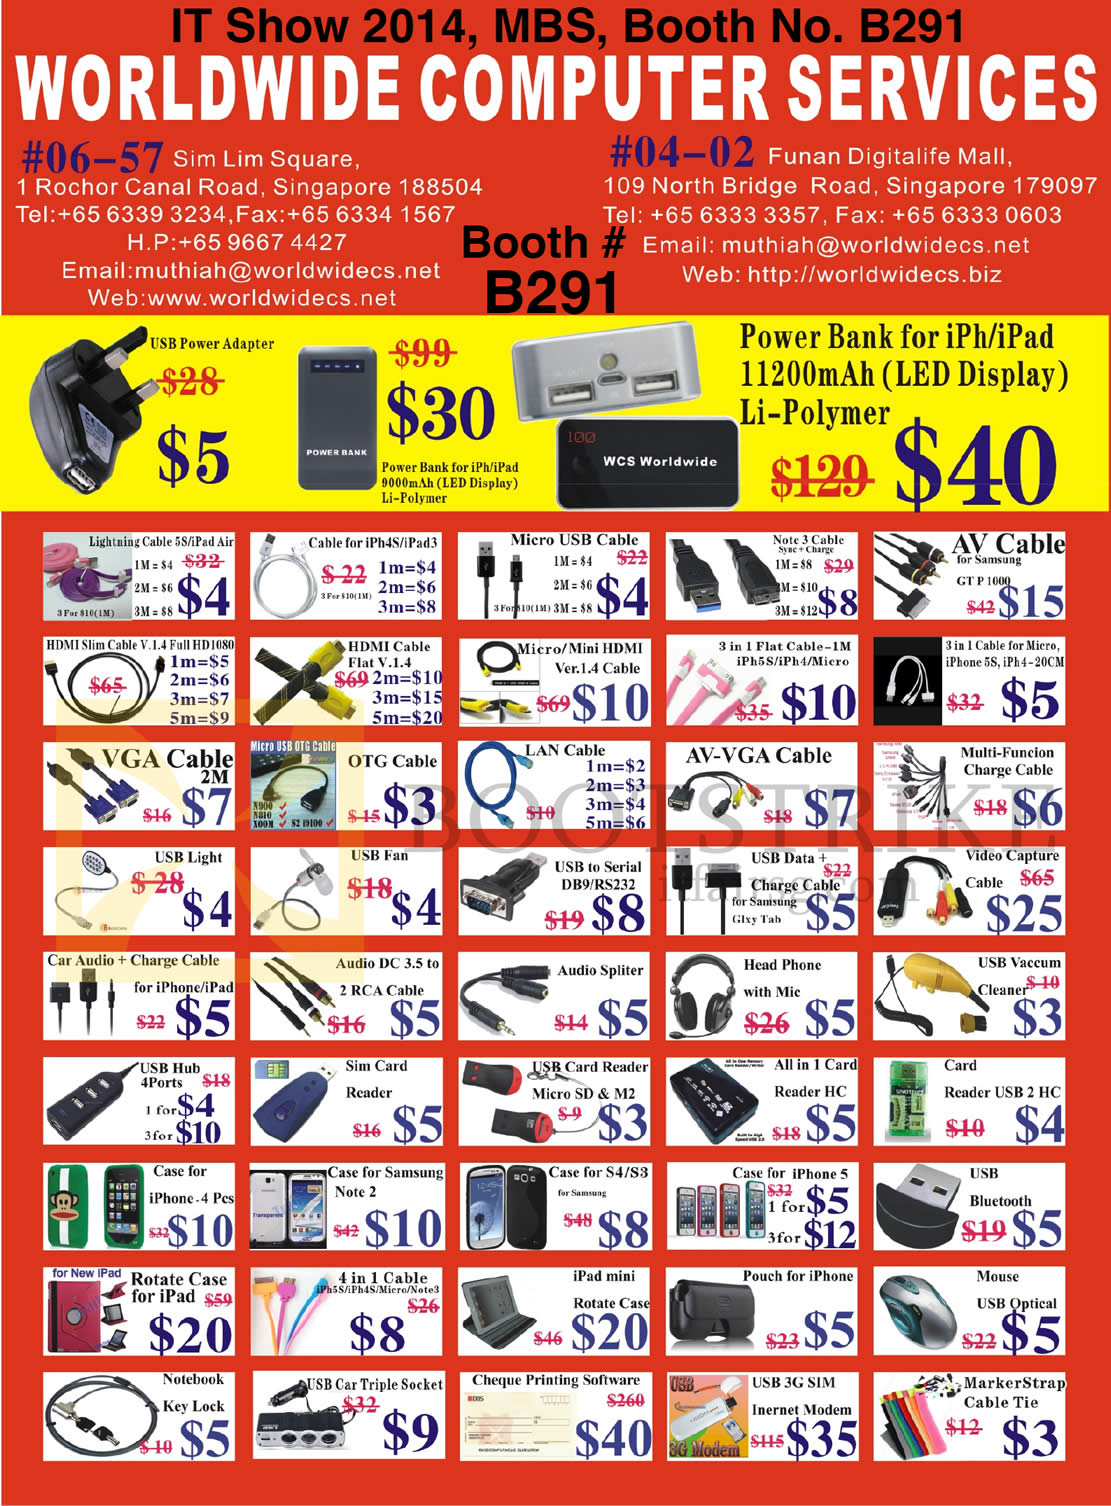 IT SHOW 2014 price list image brochure of Worldwide Computer Services Accessories Cable, IPhone Case, Ipad Case, Rotate Cases, USB 3G Sim, HDMI, Video Capture